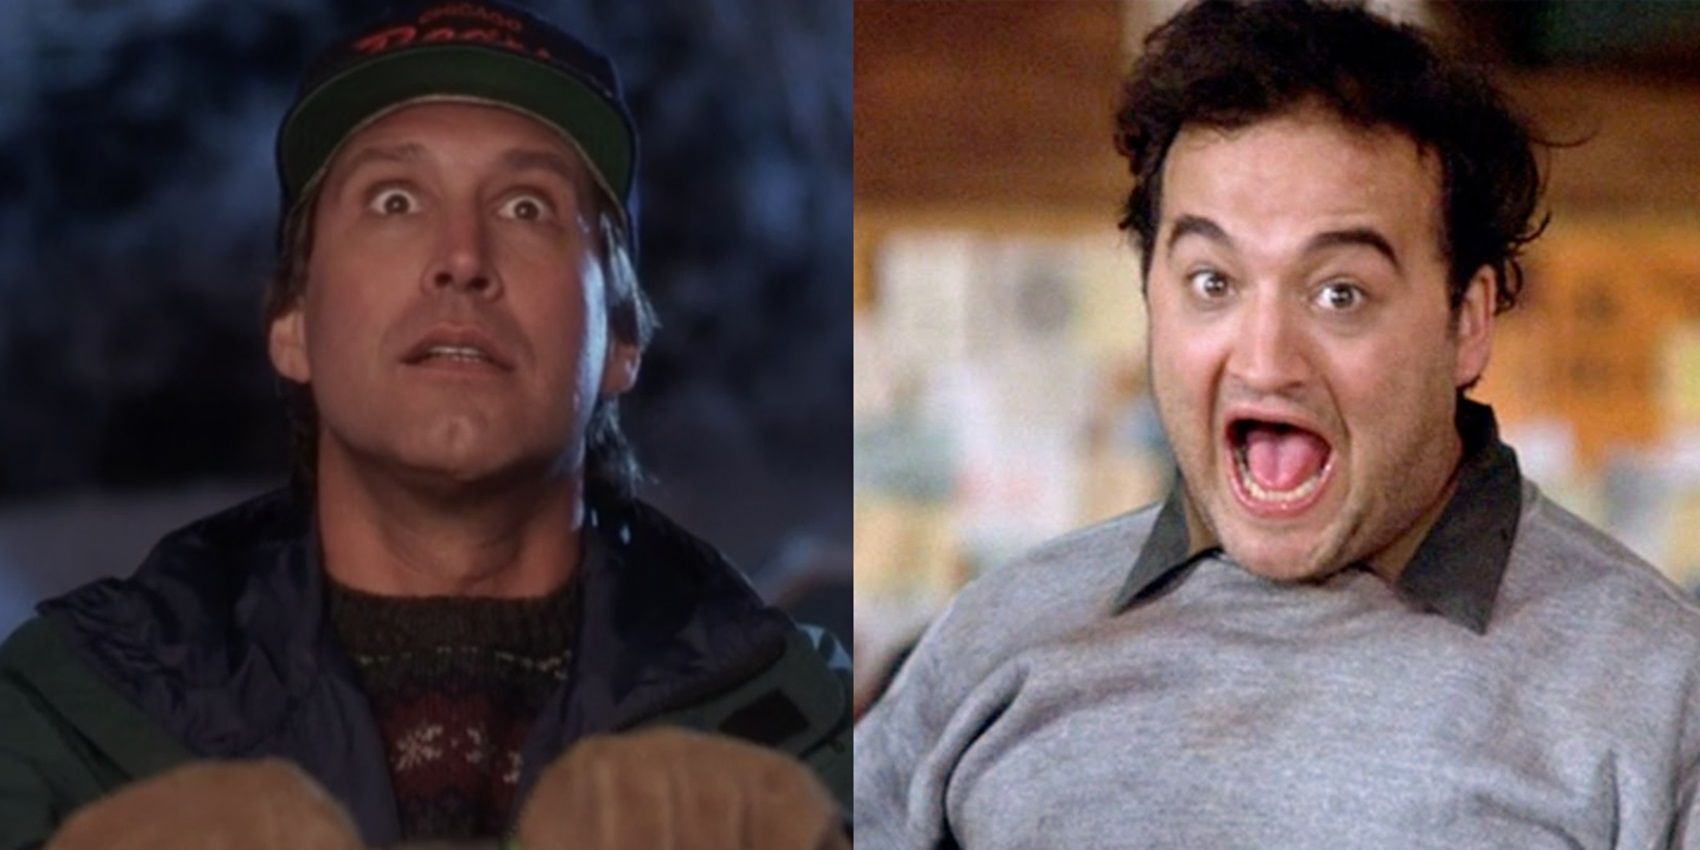 Chevy Chase in Christmas Vacation and John Belushi in Animal House